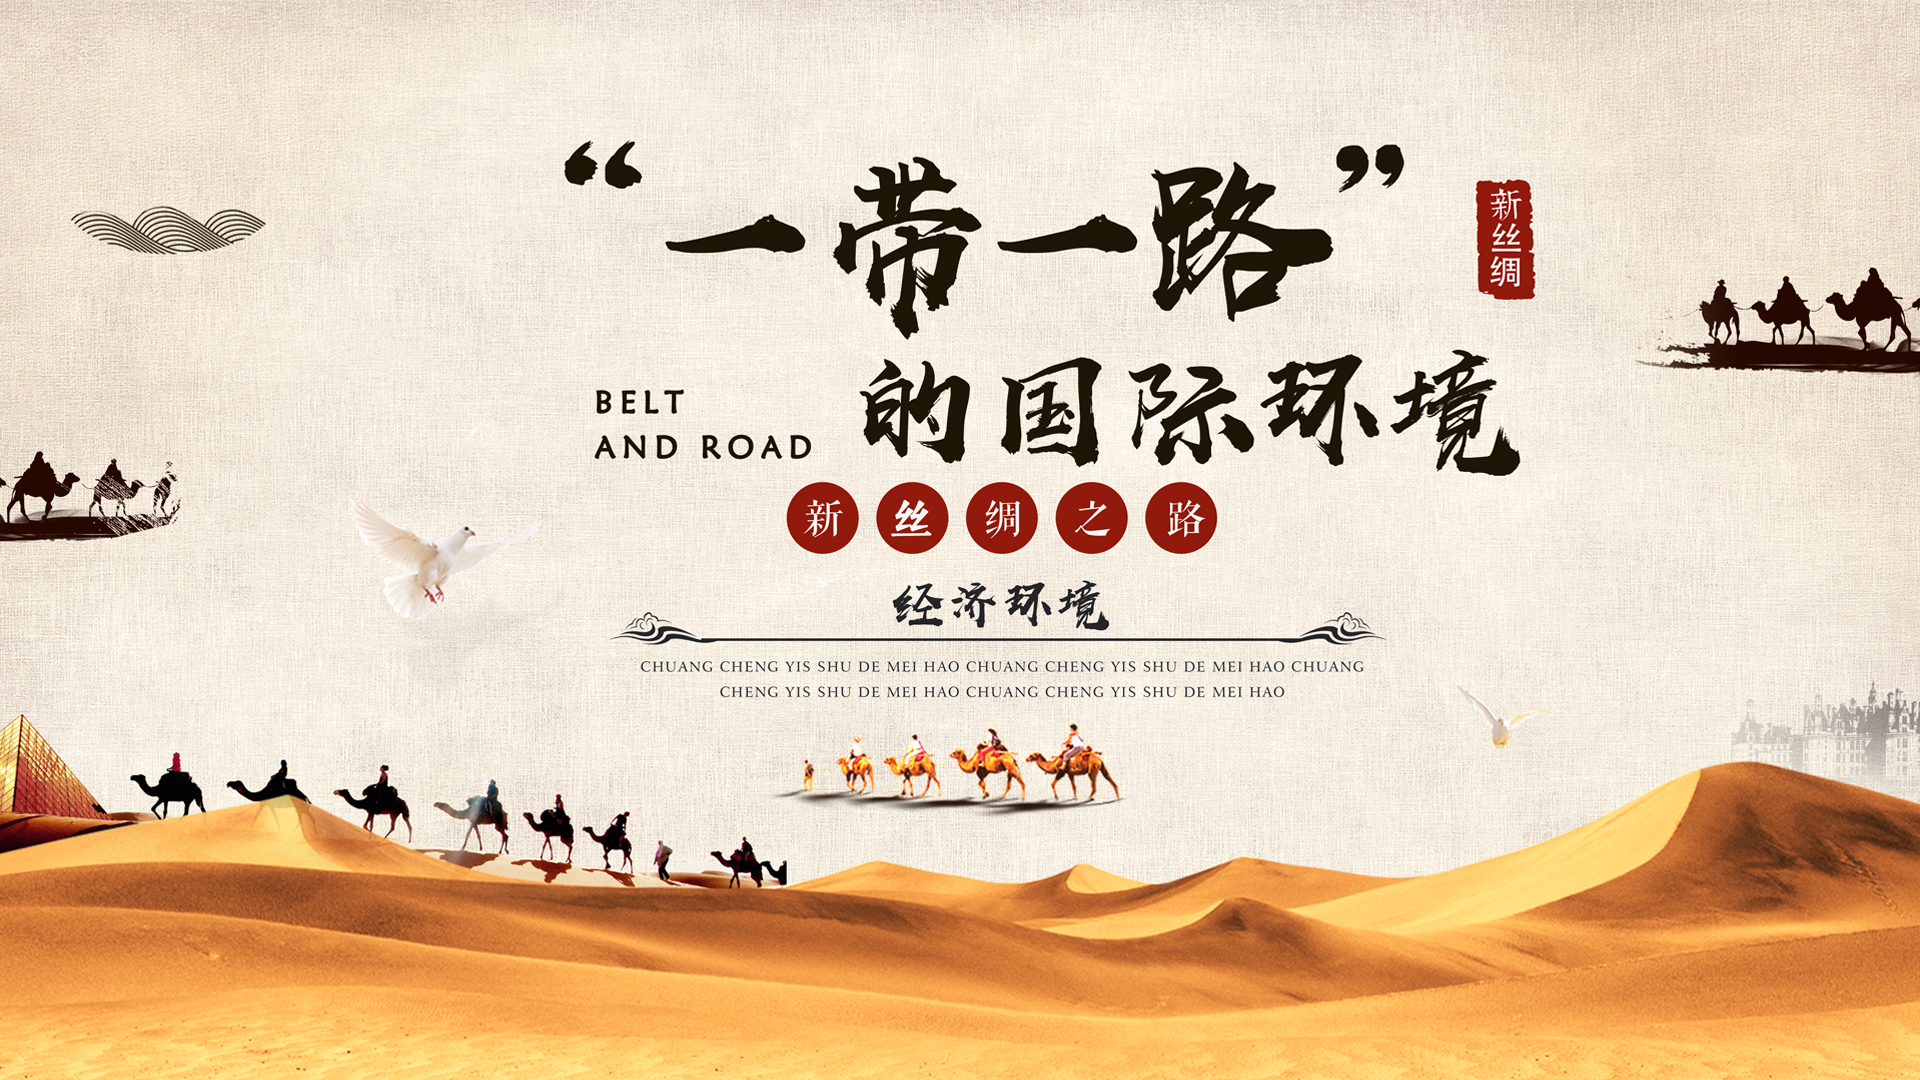 International Environment of the “Belt and Road” Initiative